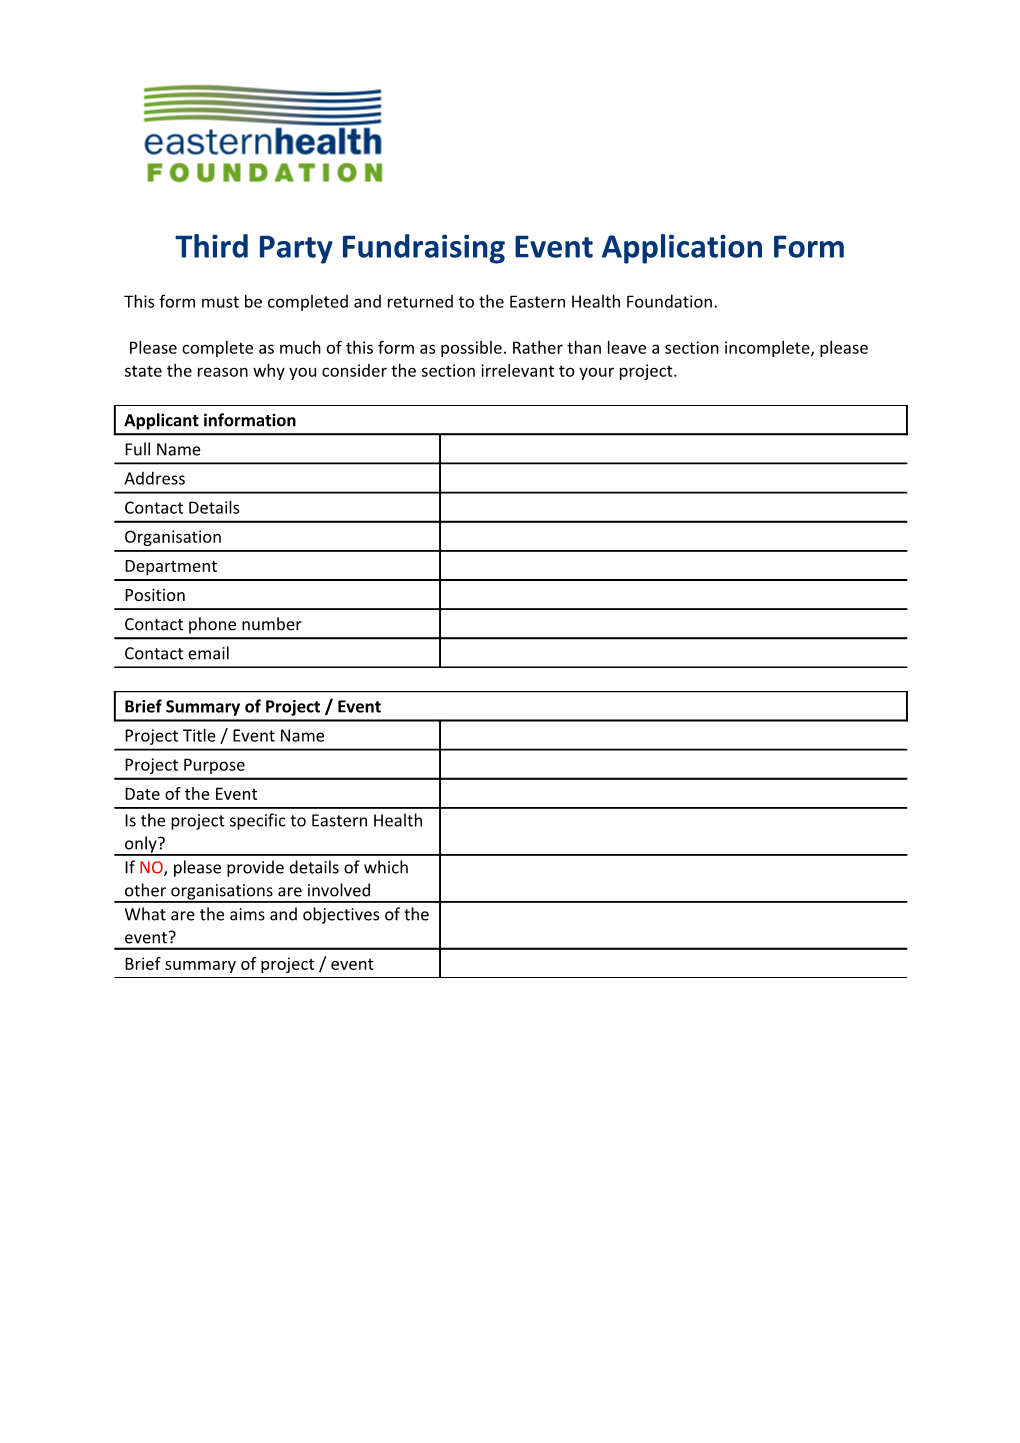 This Form Must Be Completed and Returned to the Eastern Health Foundation